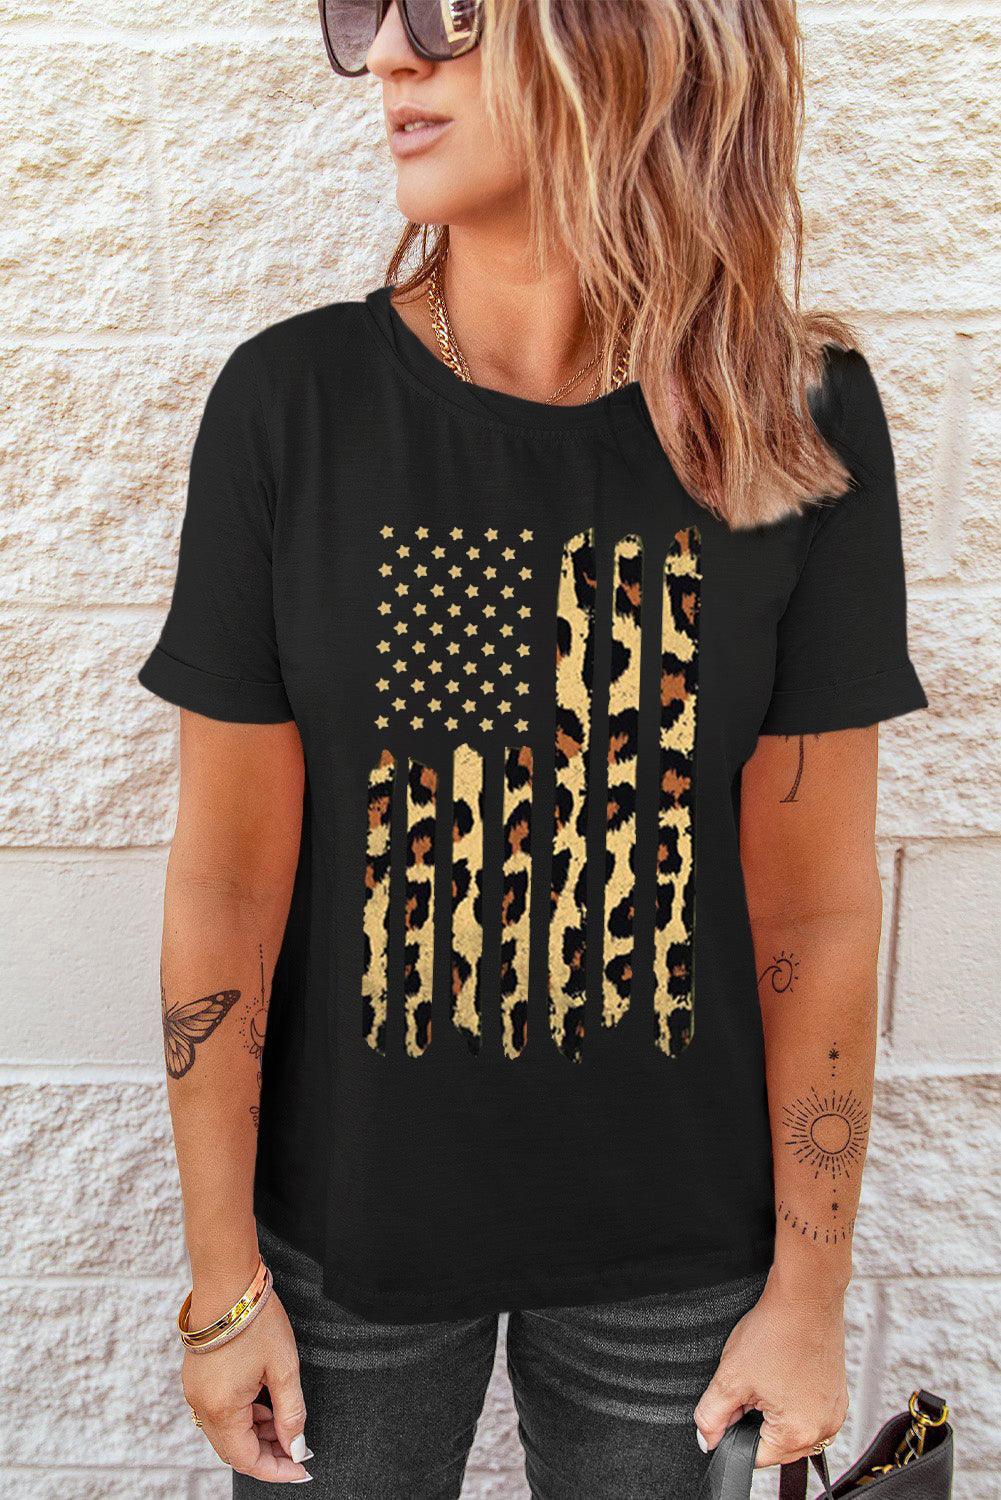 Stars and Stripes Graphic Round Neck Tee - Flyclothing LLC